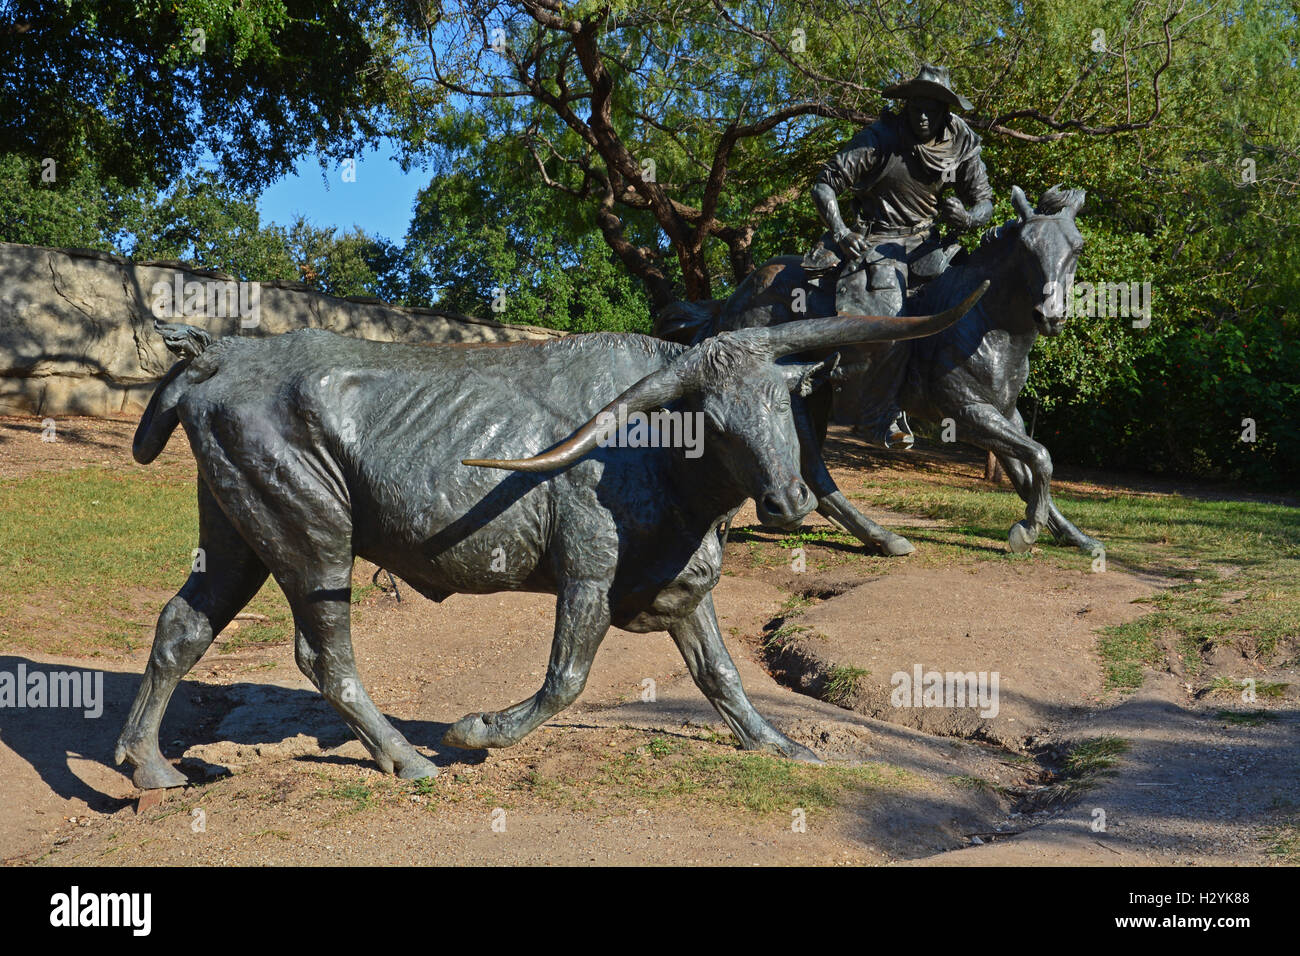 Bronze statues of a bull and cowboy on horseback, part of an old west cattle drive in Pioneer Plaza, downtown Dallas, Texas. Stock Photo